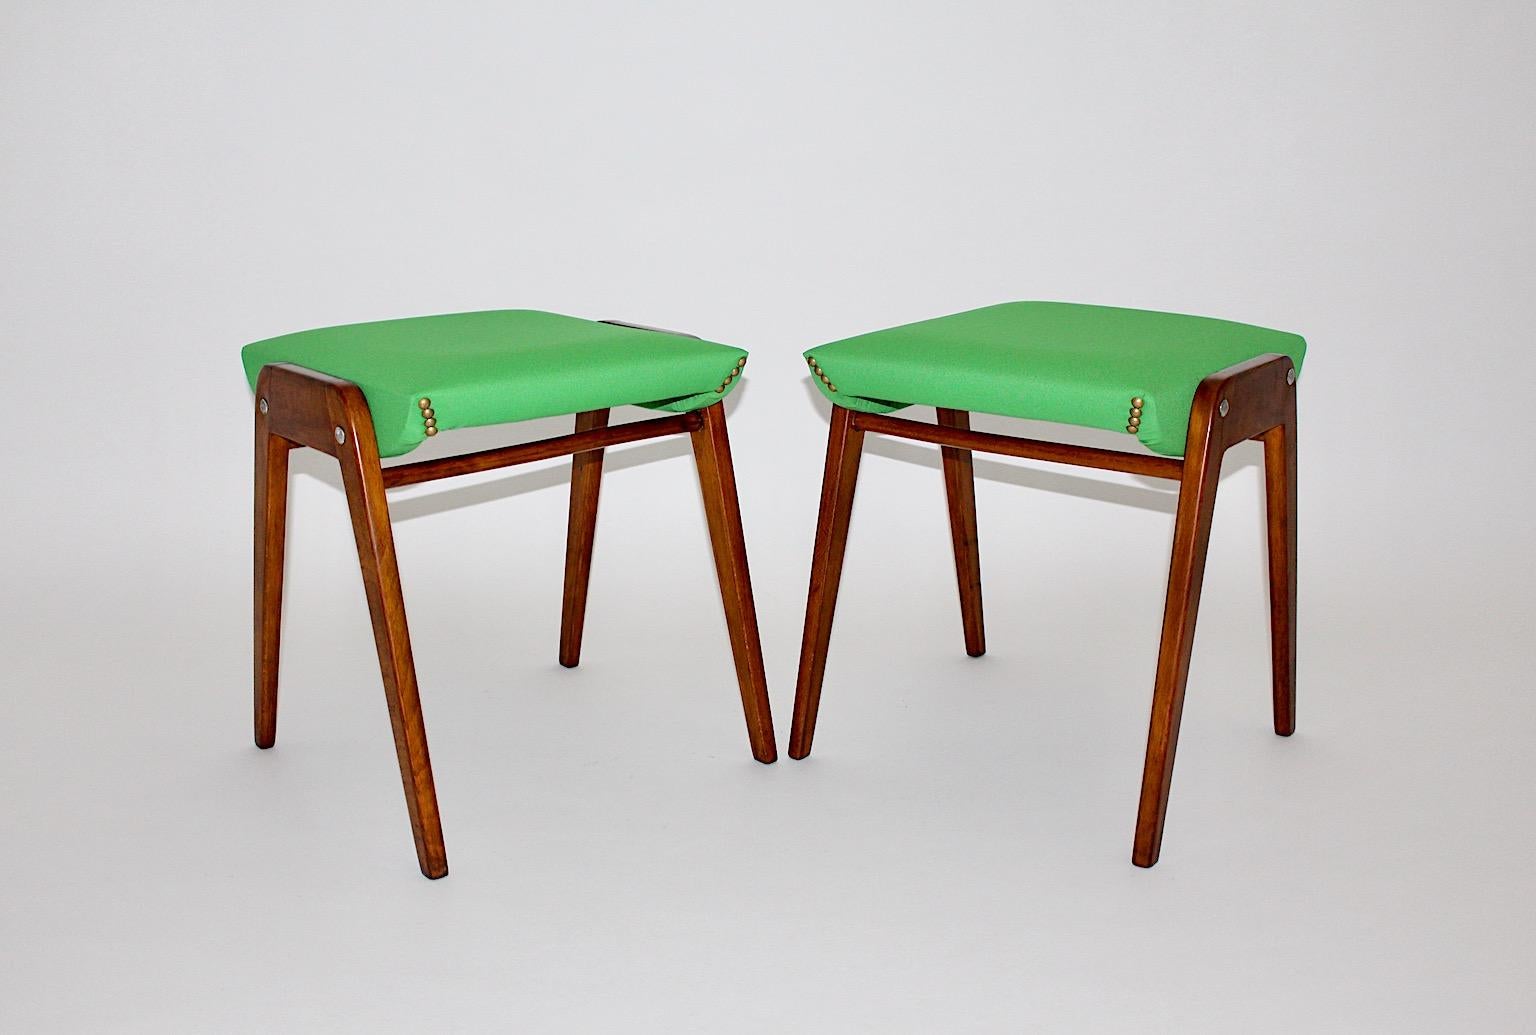 Mid Century Modern vintage pair of stools model SW 2 from beech by Roland Rainer circa 1955 Austria.
While the seat is reupholstered with light green fabric, the frame from beech is shellac polished by hand.
Bold fresh color combines with warm